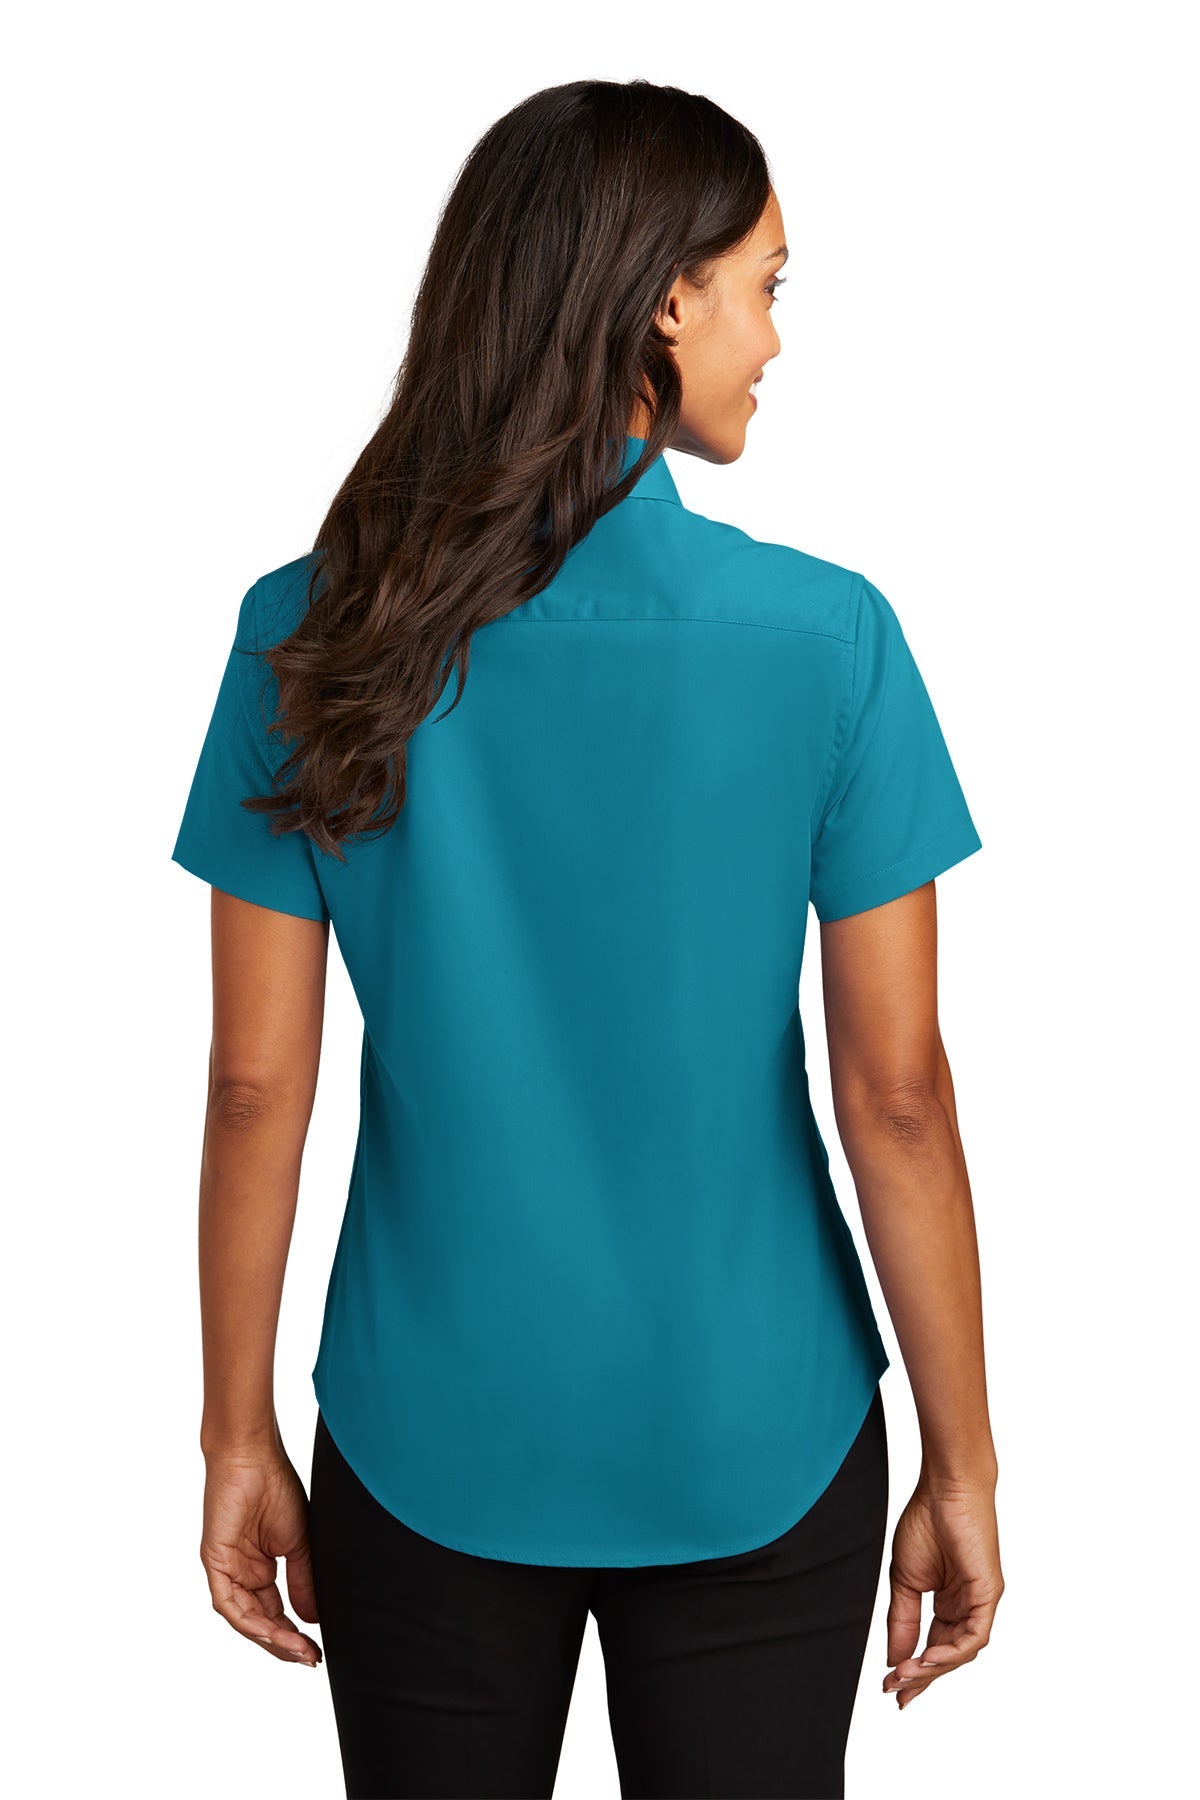 port authority_l508 _teal green_company_logo_button downs